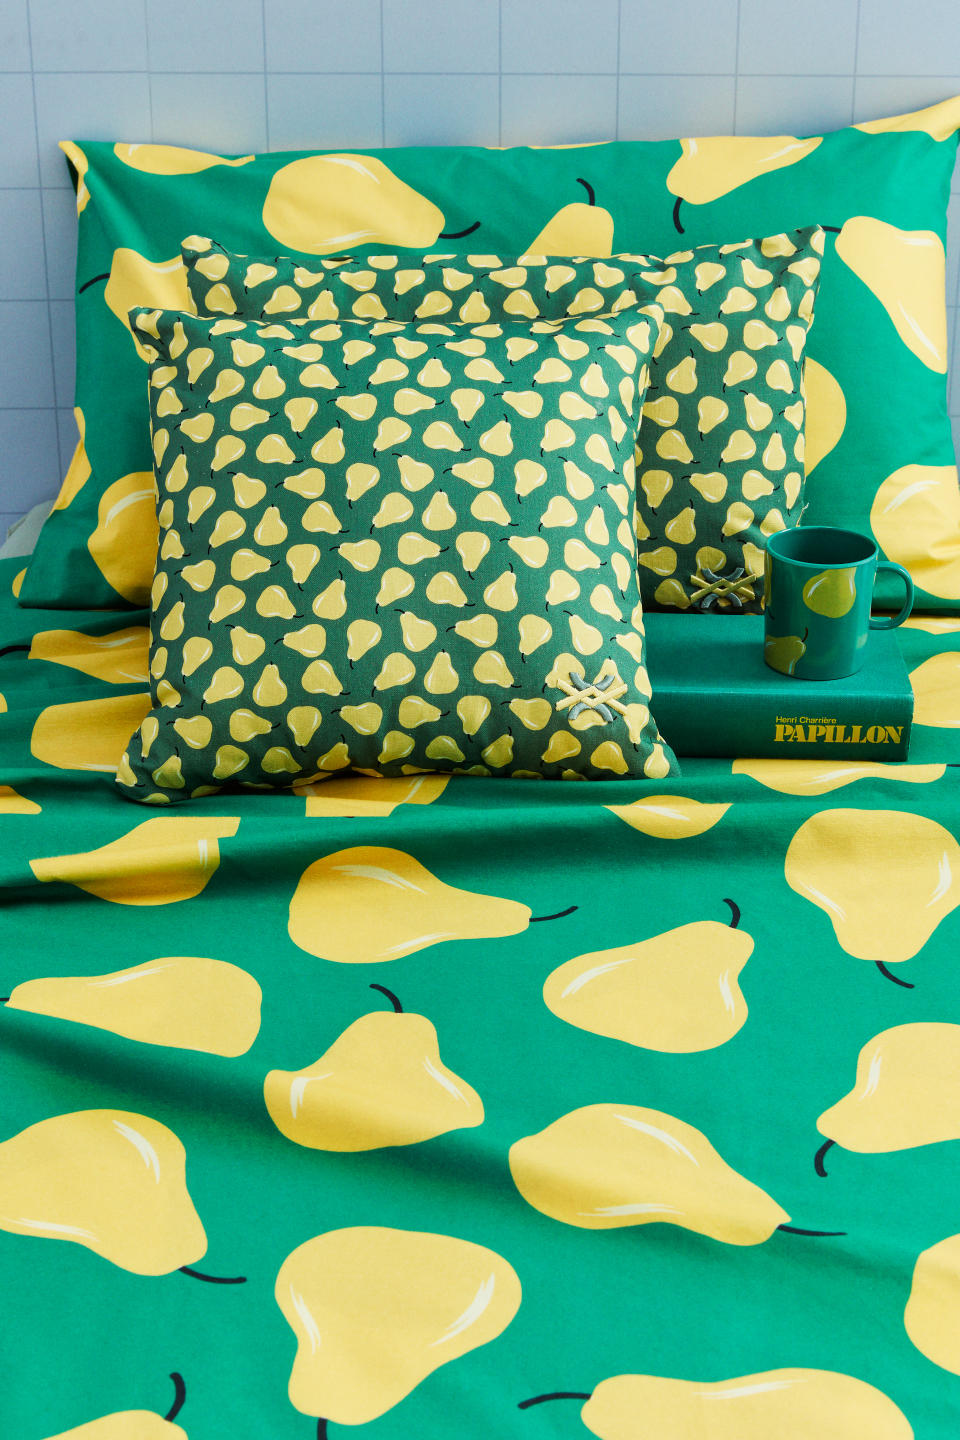 Pear bed sheets from Benetton.